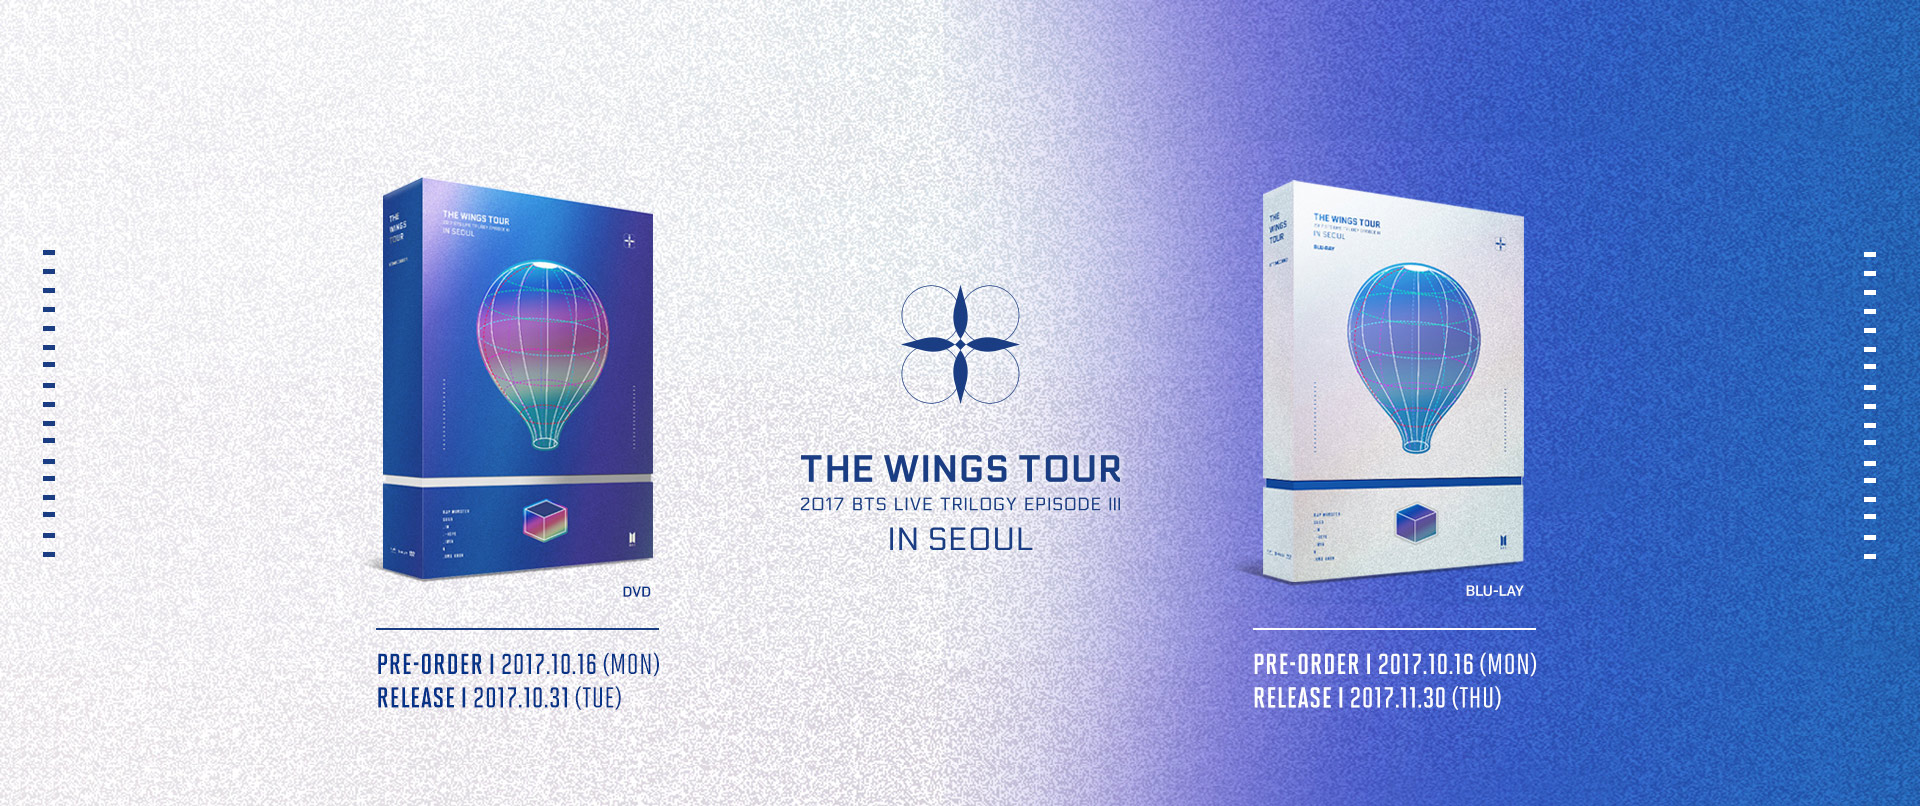 Info] 2017 BTS Live Trilogy EPISODE III THE WINGS TOUR in Seoul 